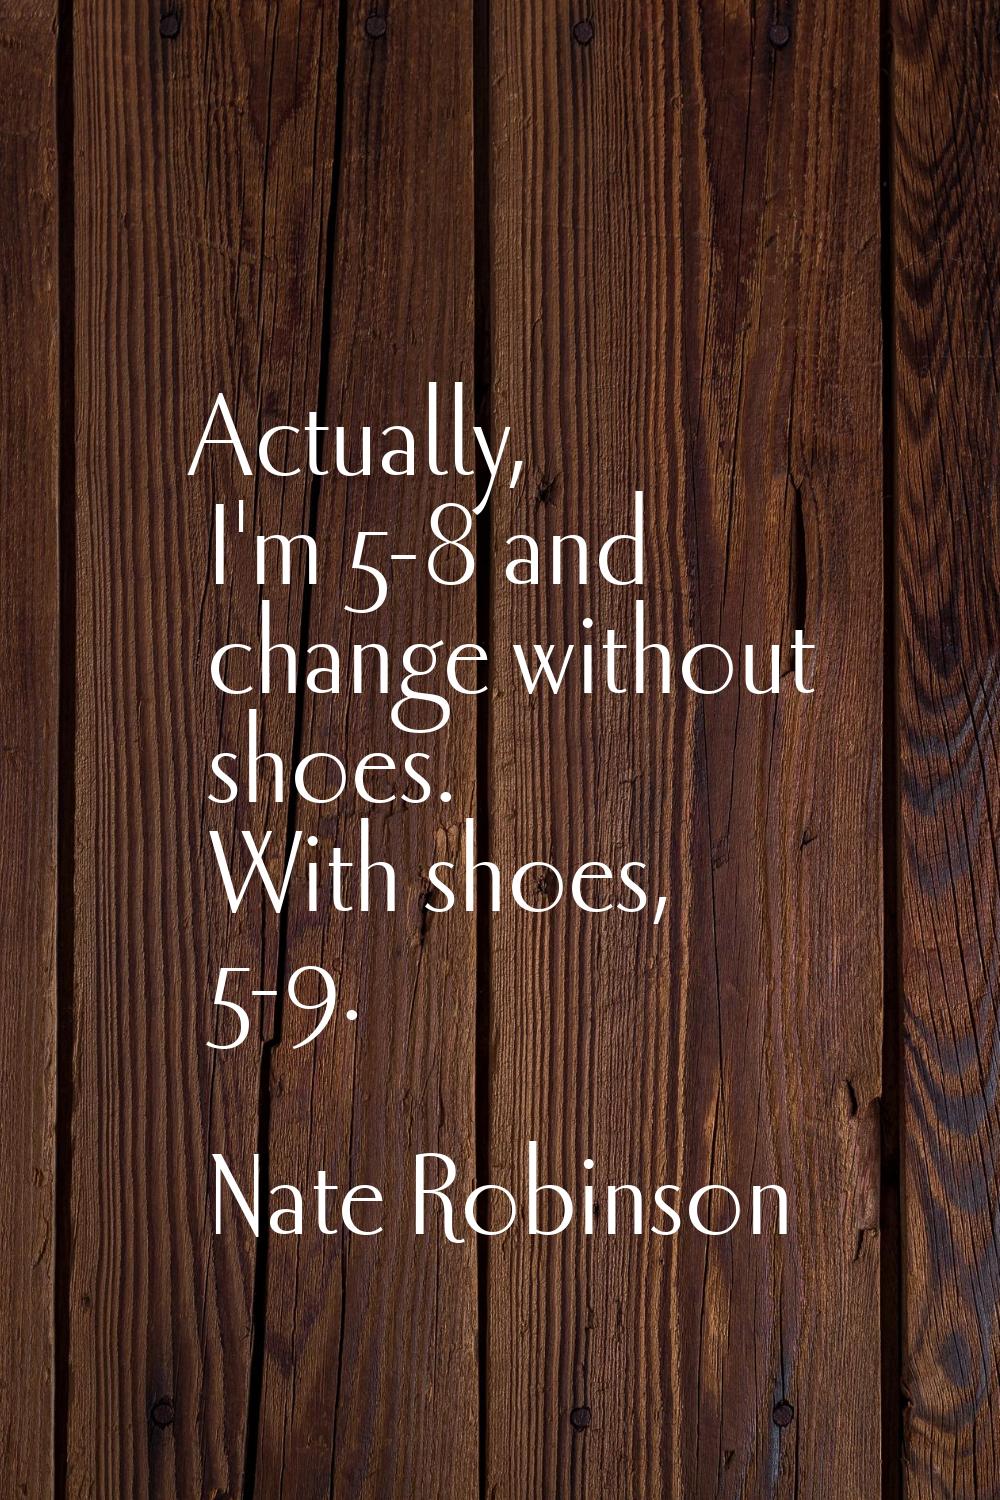 Actually, I'm 5-8 and change without shoes. With shoes, 5-9.